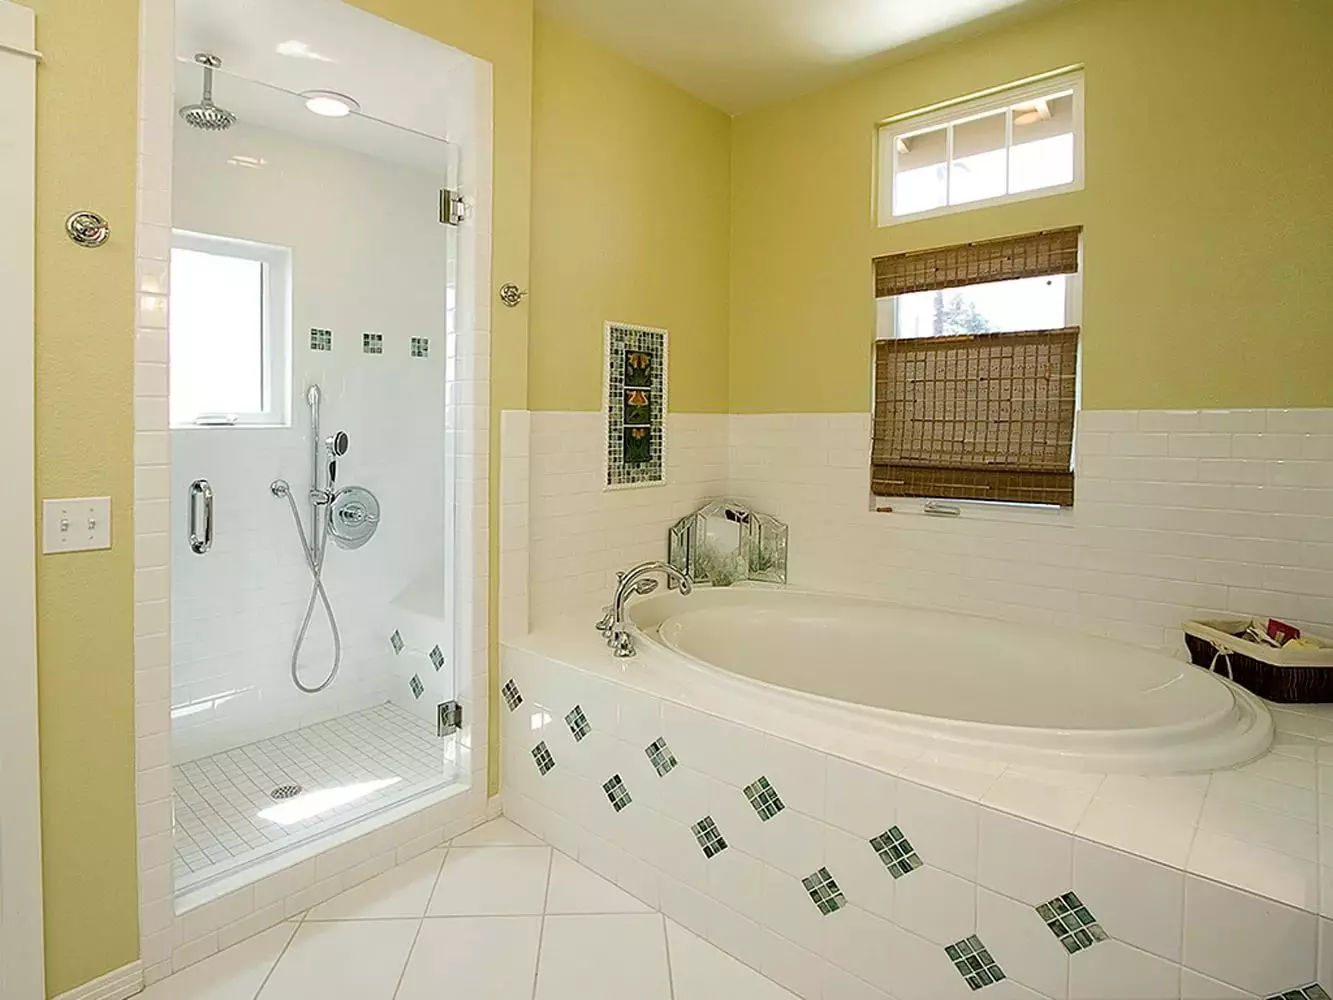 How to separate the walls in the bathroom other than tiles? 65 photos: design options. Wallpapers and other finishing materials. What can be sewn and wall instead of tile? 10108_3